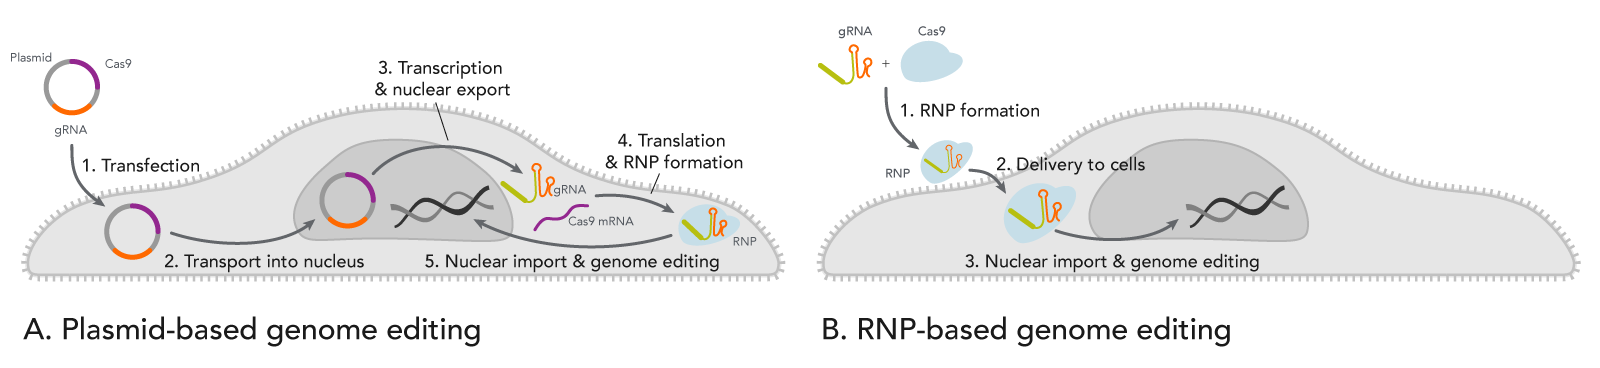 CRISPR plasmid transfection slows genome editing compared to direct RNP introduction.